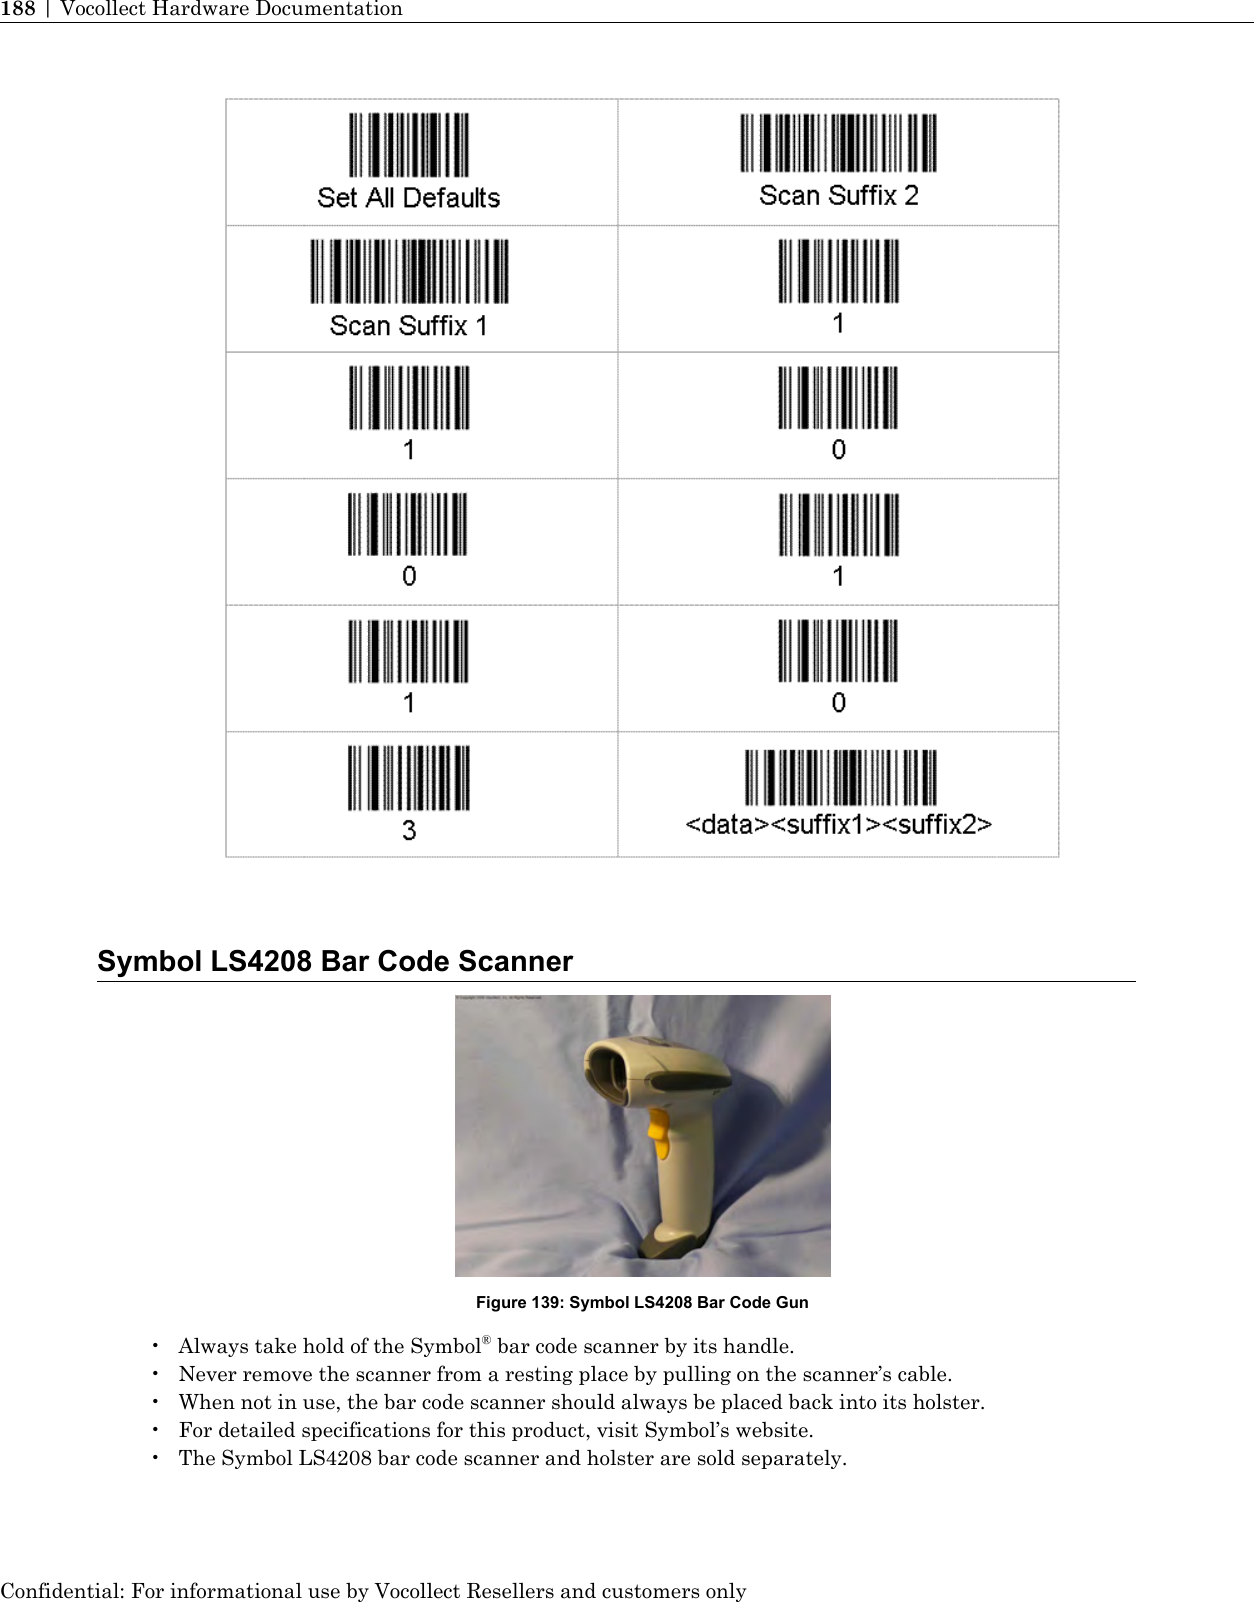 Symbol LS4208 Bar Code ScannerFigure 139: Symbol LS4208 Bar Code Gun• Always take hold of the Symbol®bar code scanner by its handle.• Never remove the scanner from a resting place by pulling on the scanner’s cable.• When not in use, the bar code scanner should always be placed back into its holster.• For detailed specifications for this product, visit Symbol’s website.• The Symbol LS4208 bar code scanner and holster are sold separately.Confidential: For informational use by Vocollect Resellers and customers only188 | Vocollect Hardware Documentation